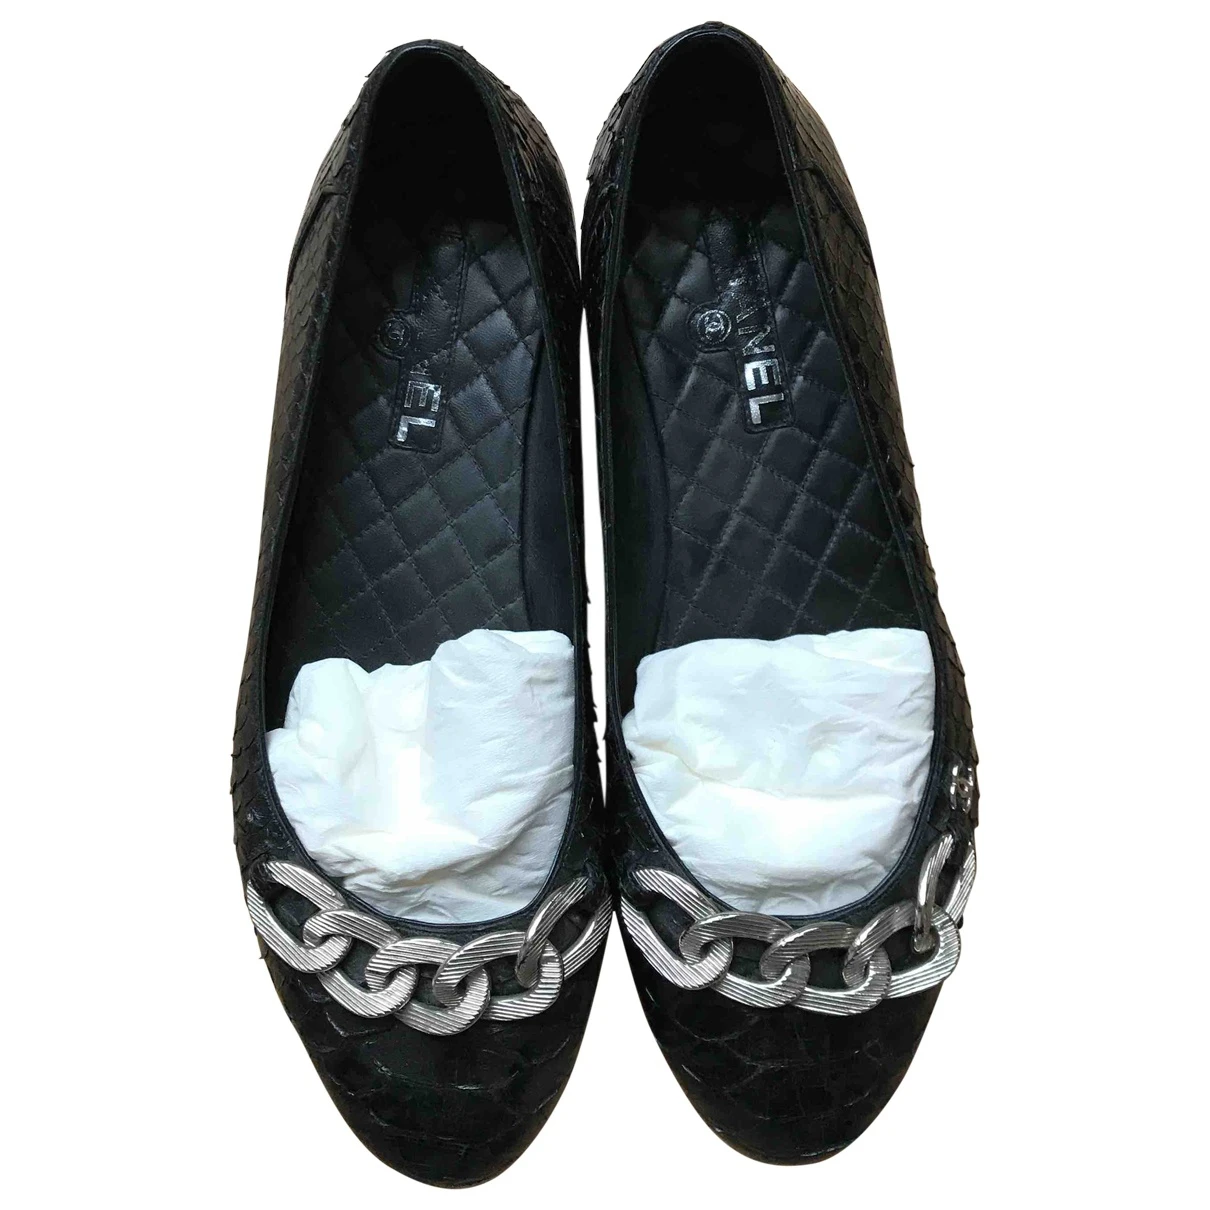 shoes Chanel ballet flats for Female Python 38 EU. Used condition